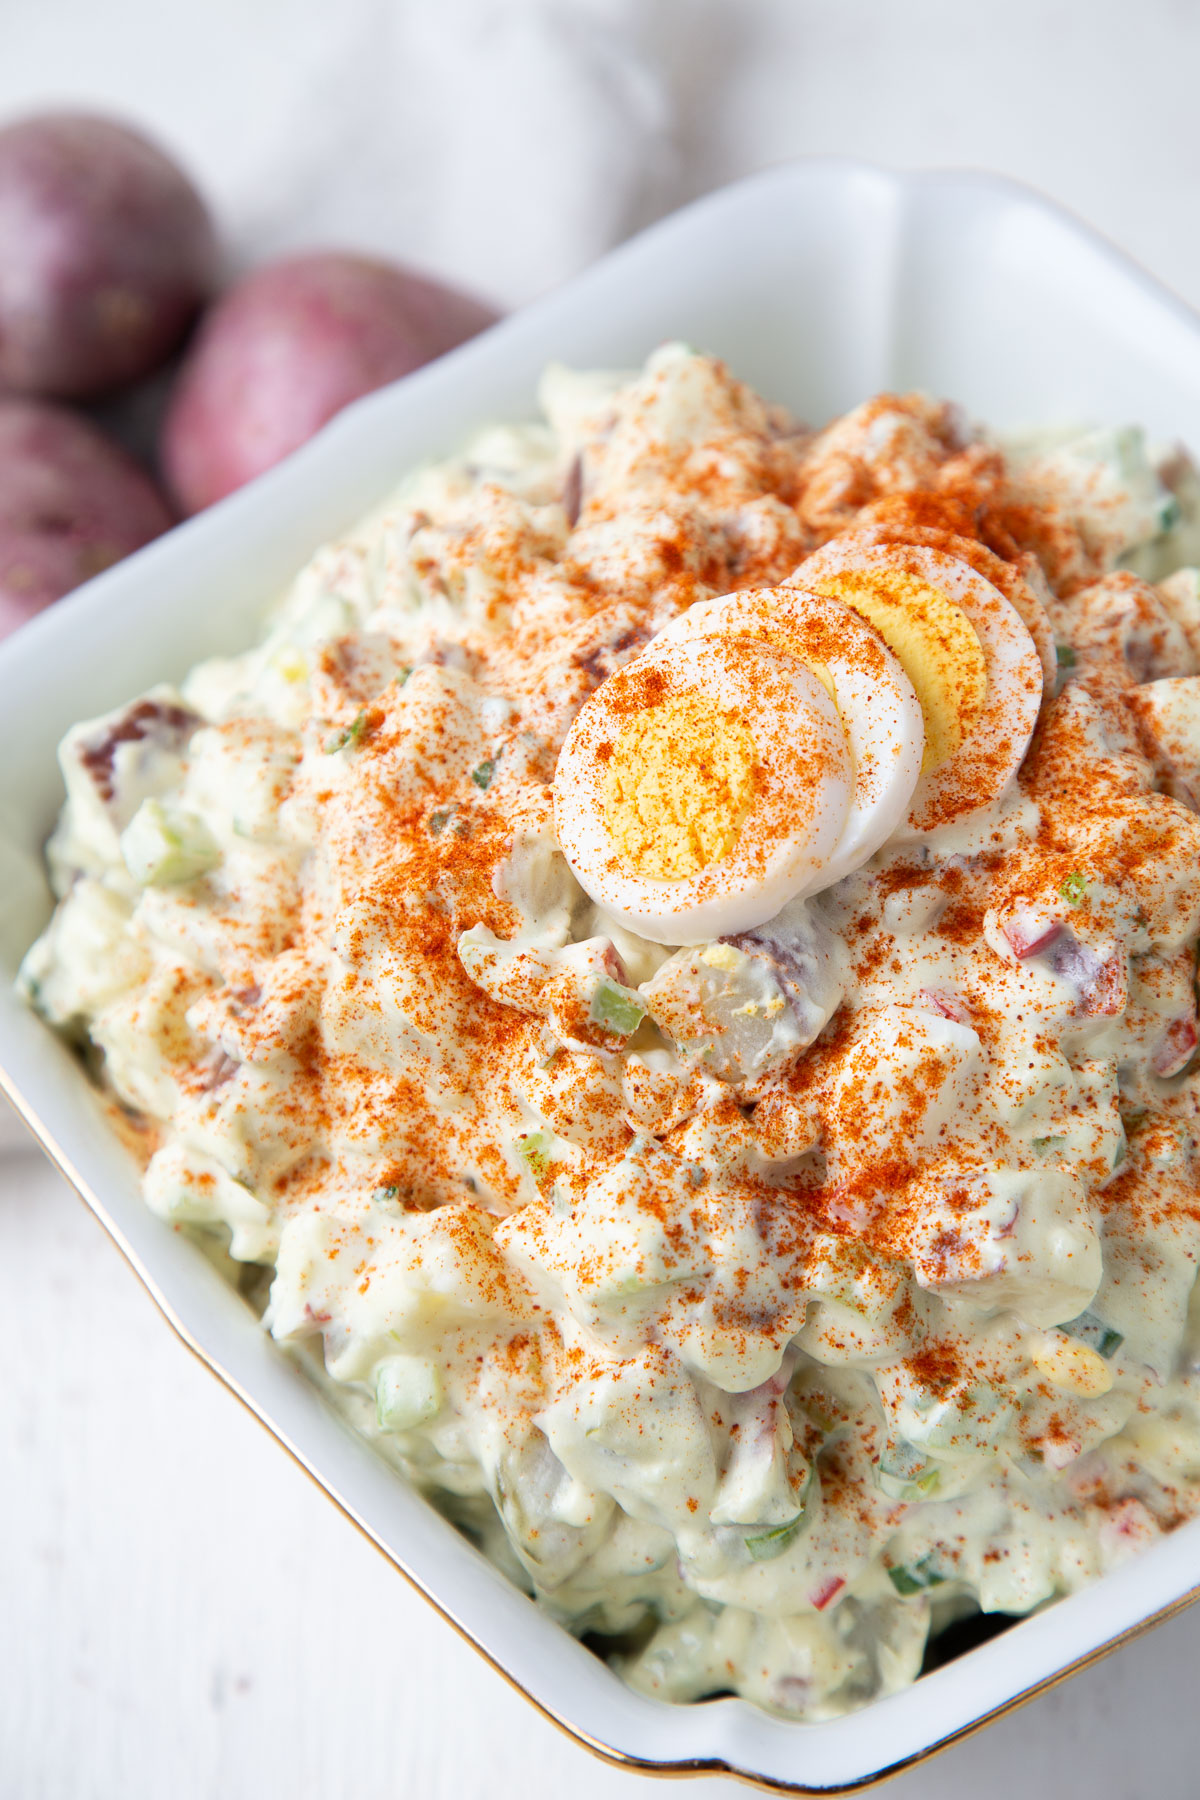 red potato salad topped with hard boiled eggs and paprika.